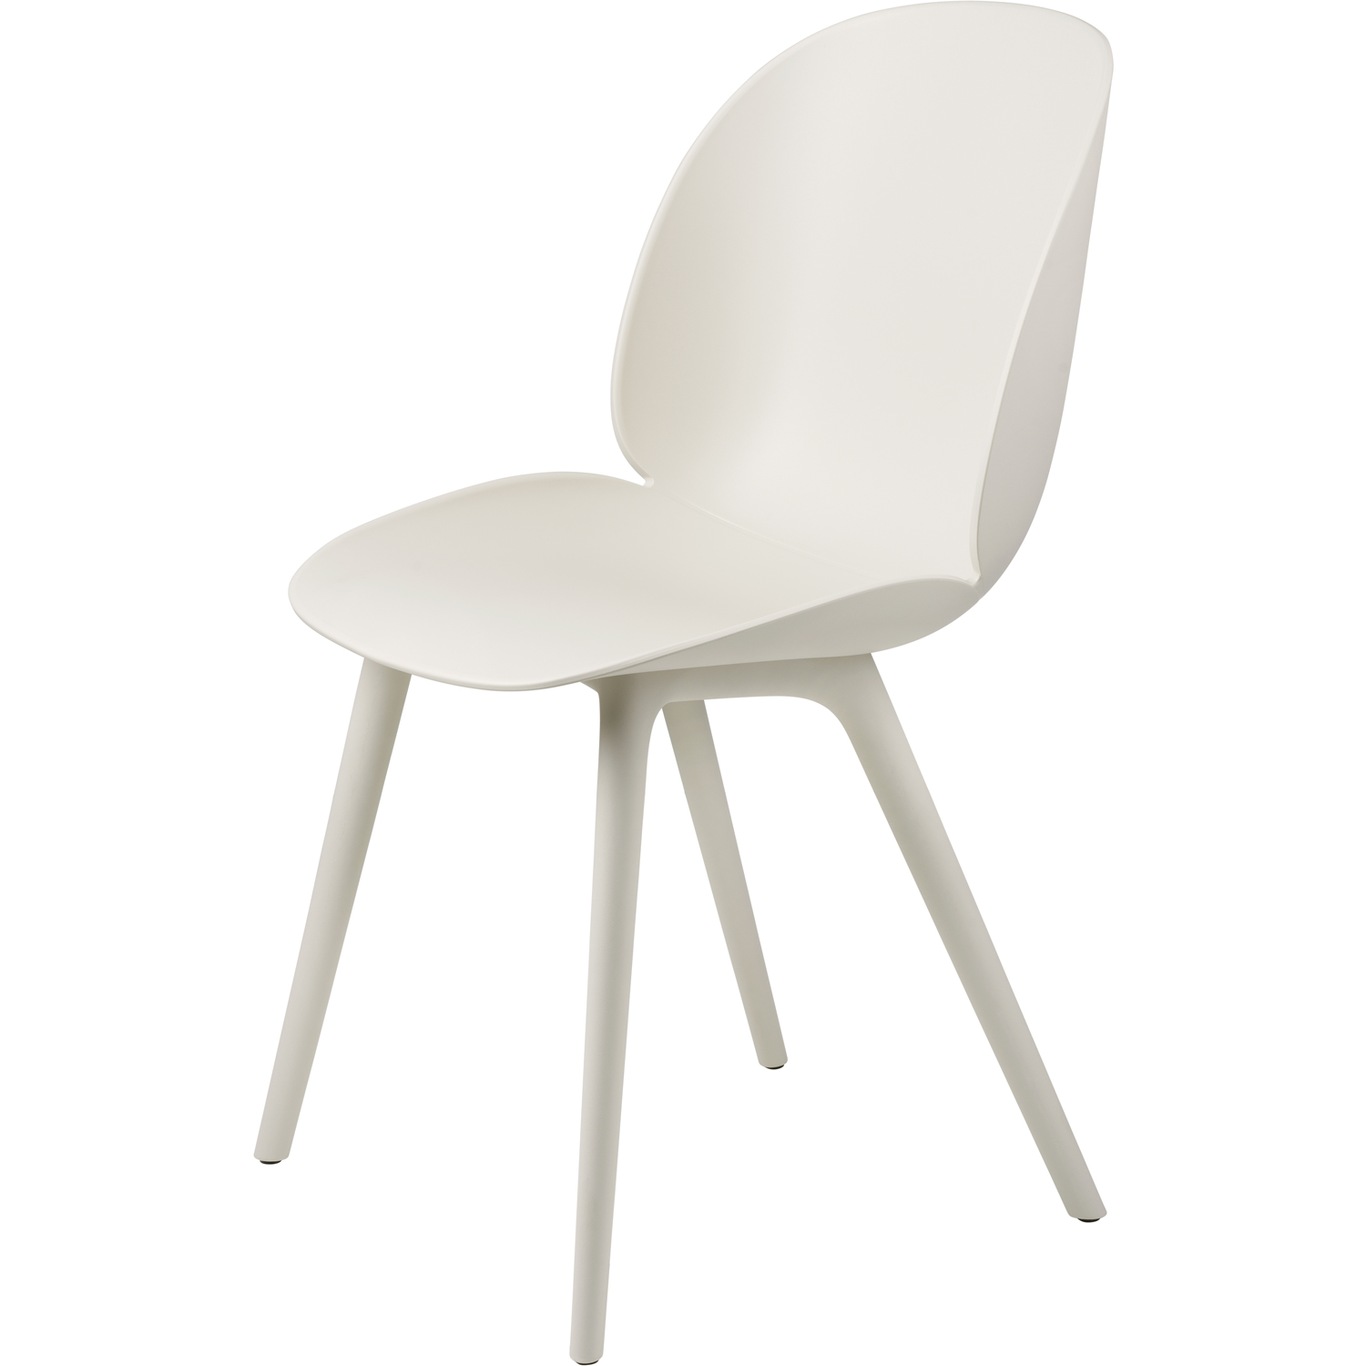 Beetle Chair Un-upholstered Plastic White Base, Alabaster White